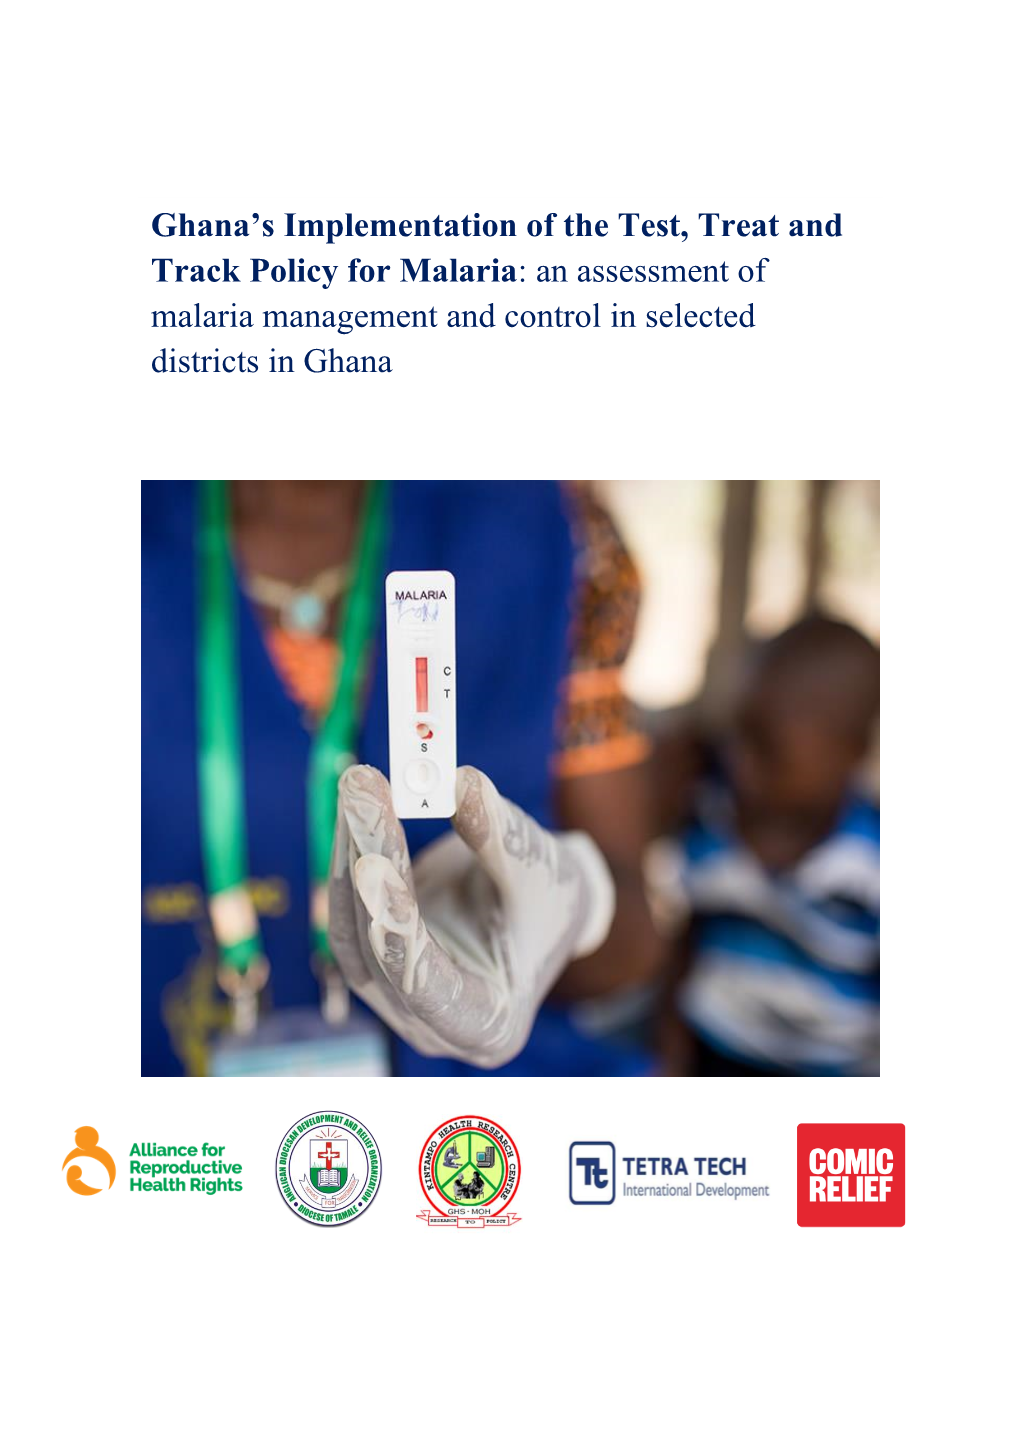 Ghana's Implementation of the Test, Treat and Track Policy for Malaria